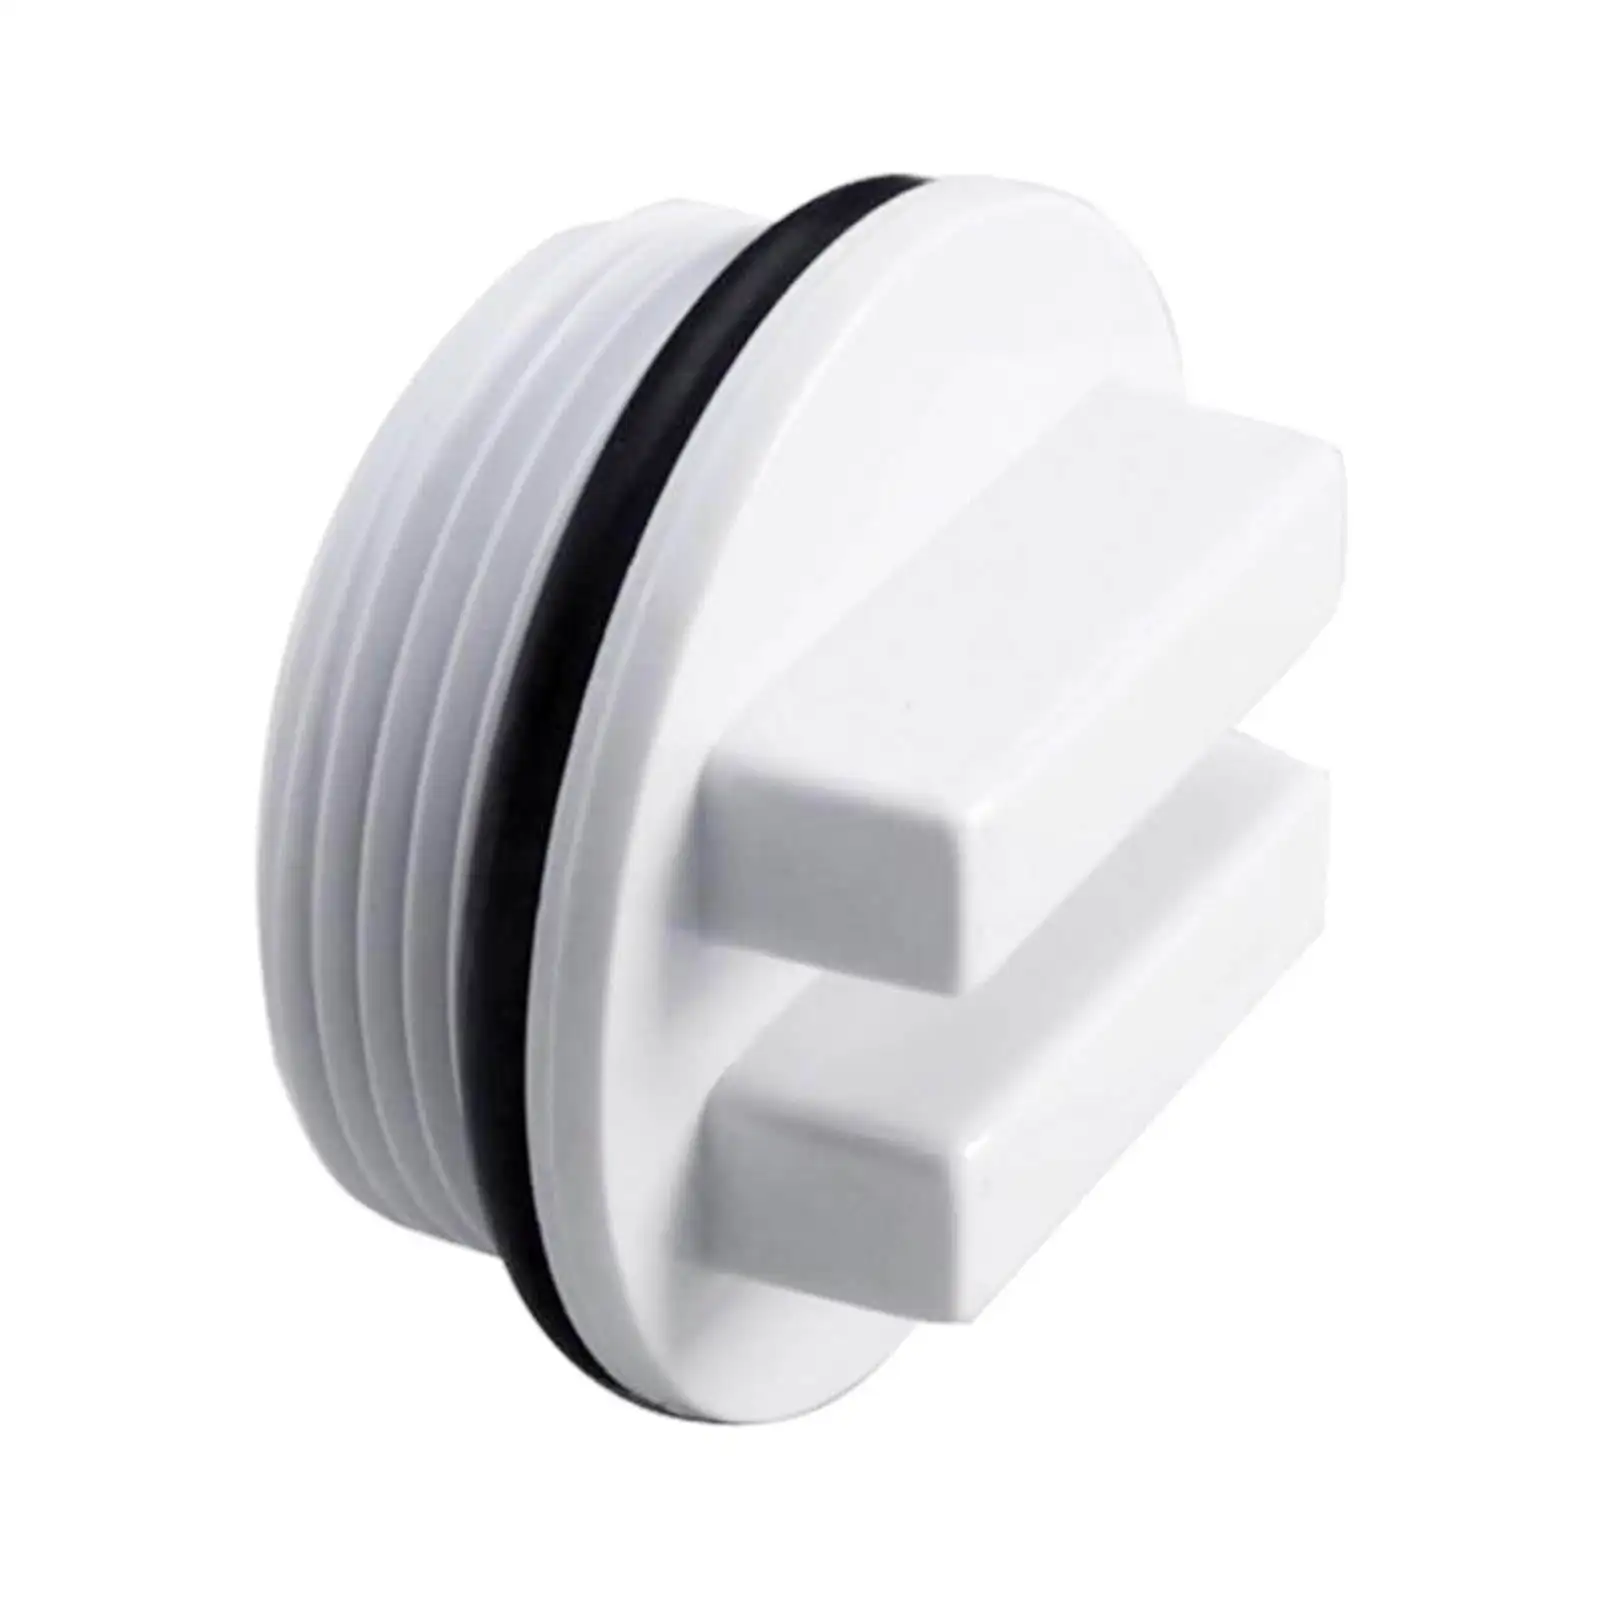 1.5 inch Pool Spa Return Line Winterizing Plug Filter Drain  with O-Ring for Swimming Pool Accessories Fittings Parts